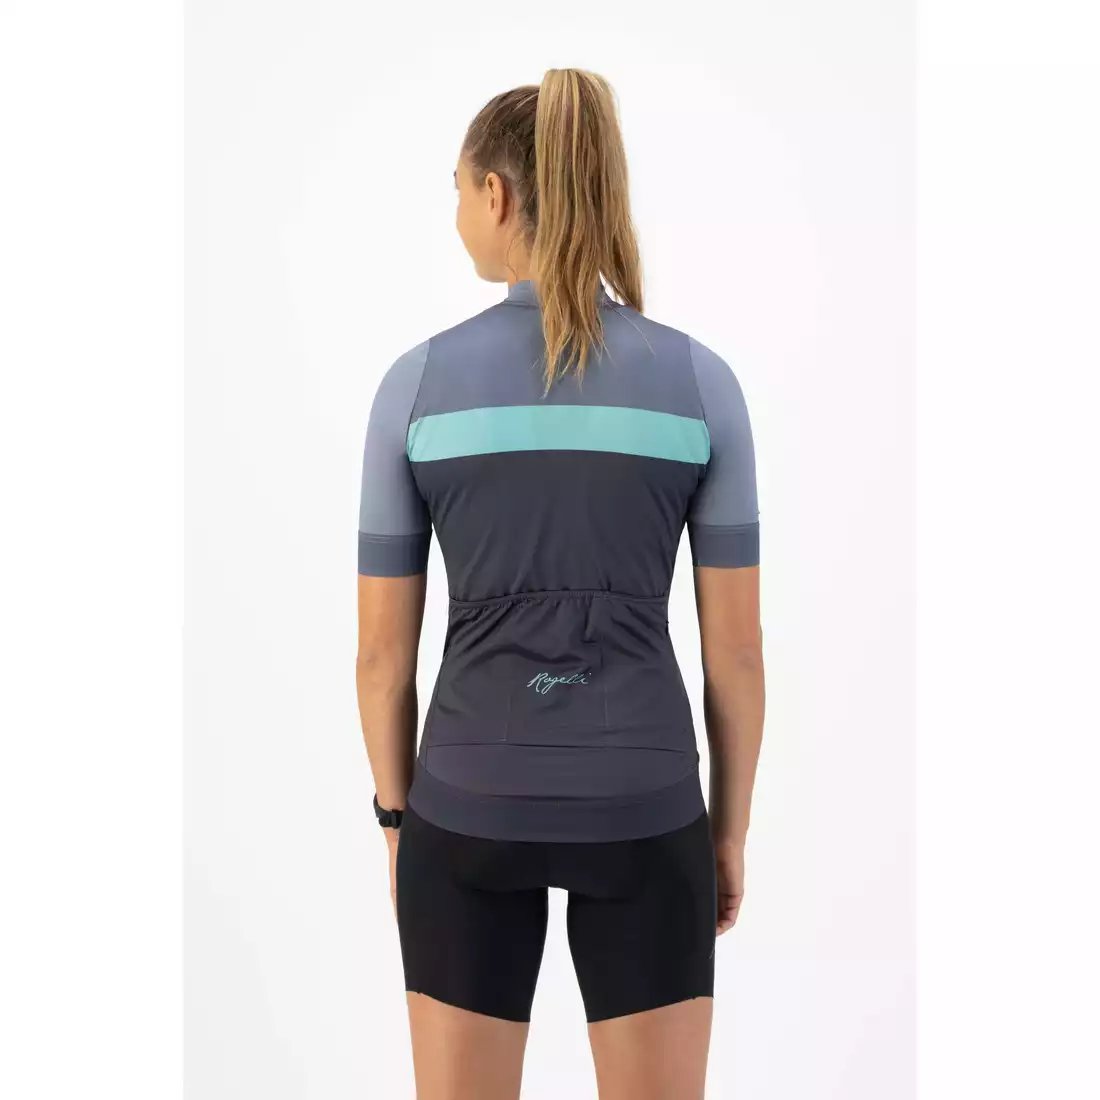 ROGELLI PRIME Cycling jersey for women, gray and blue